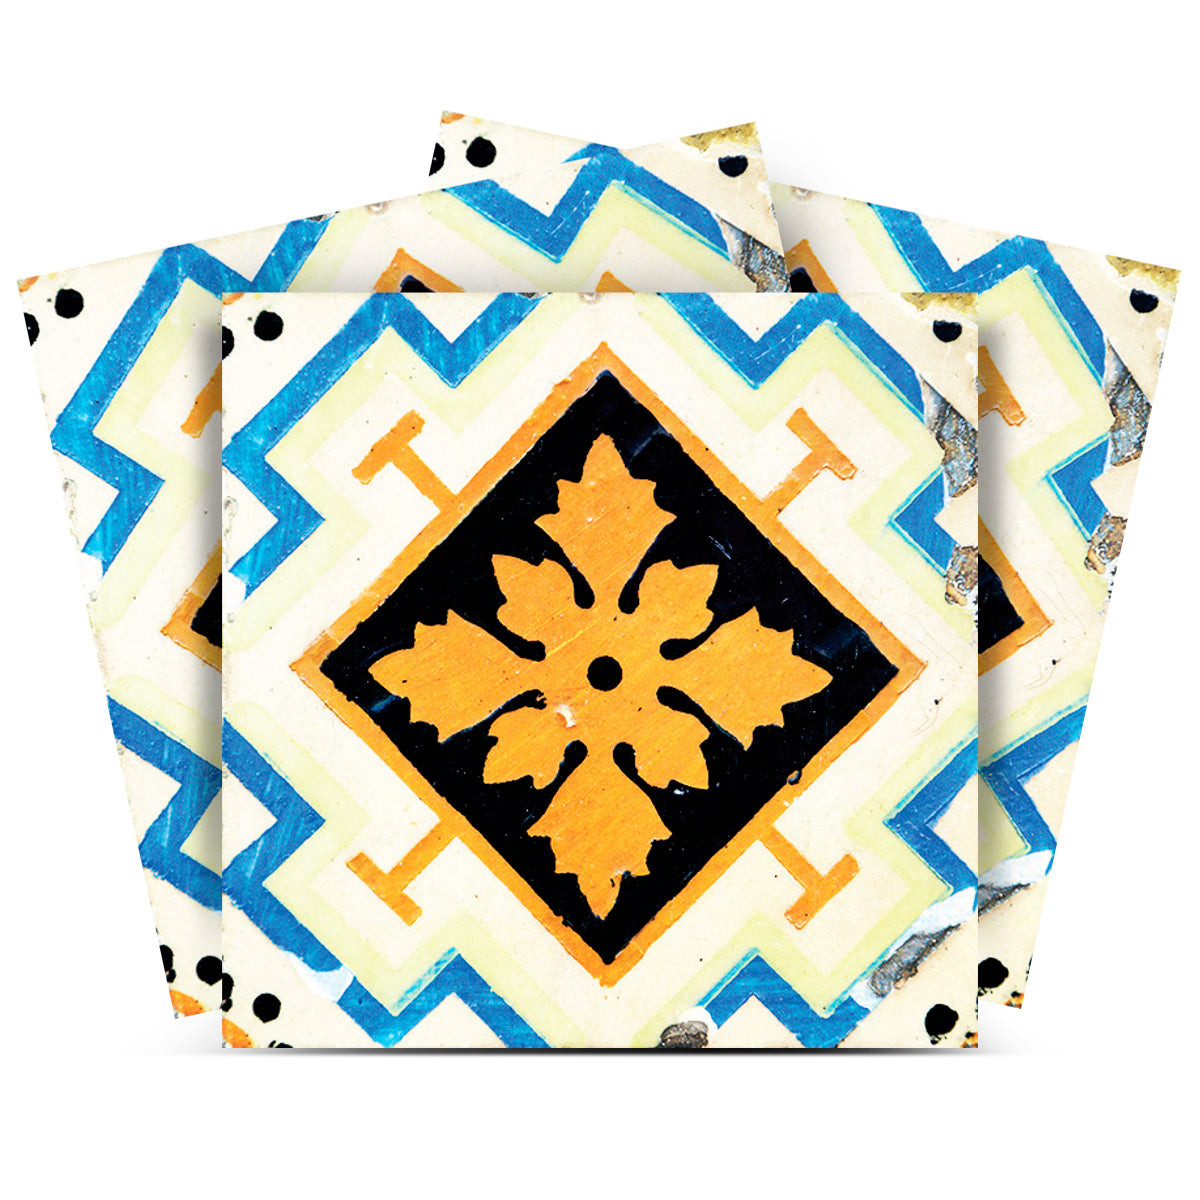 5" x 5" Gold Snowflake Peel and Stick Removable Tiles-400485-1